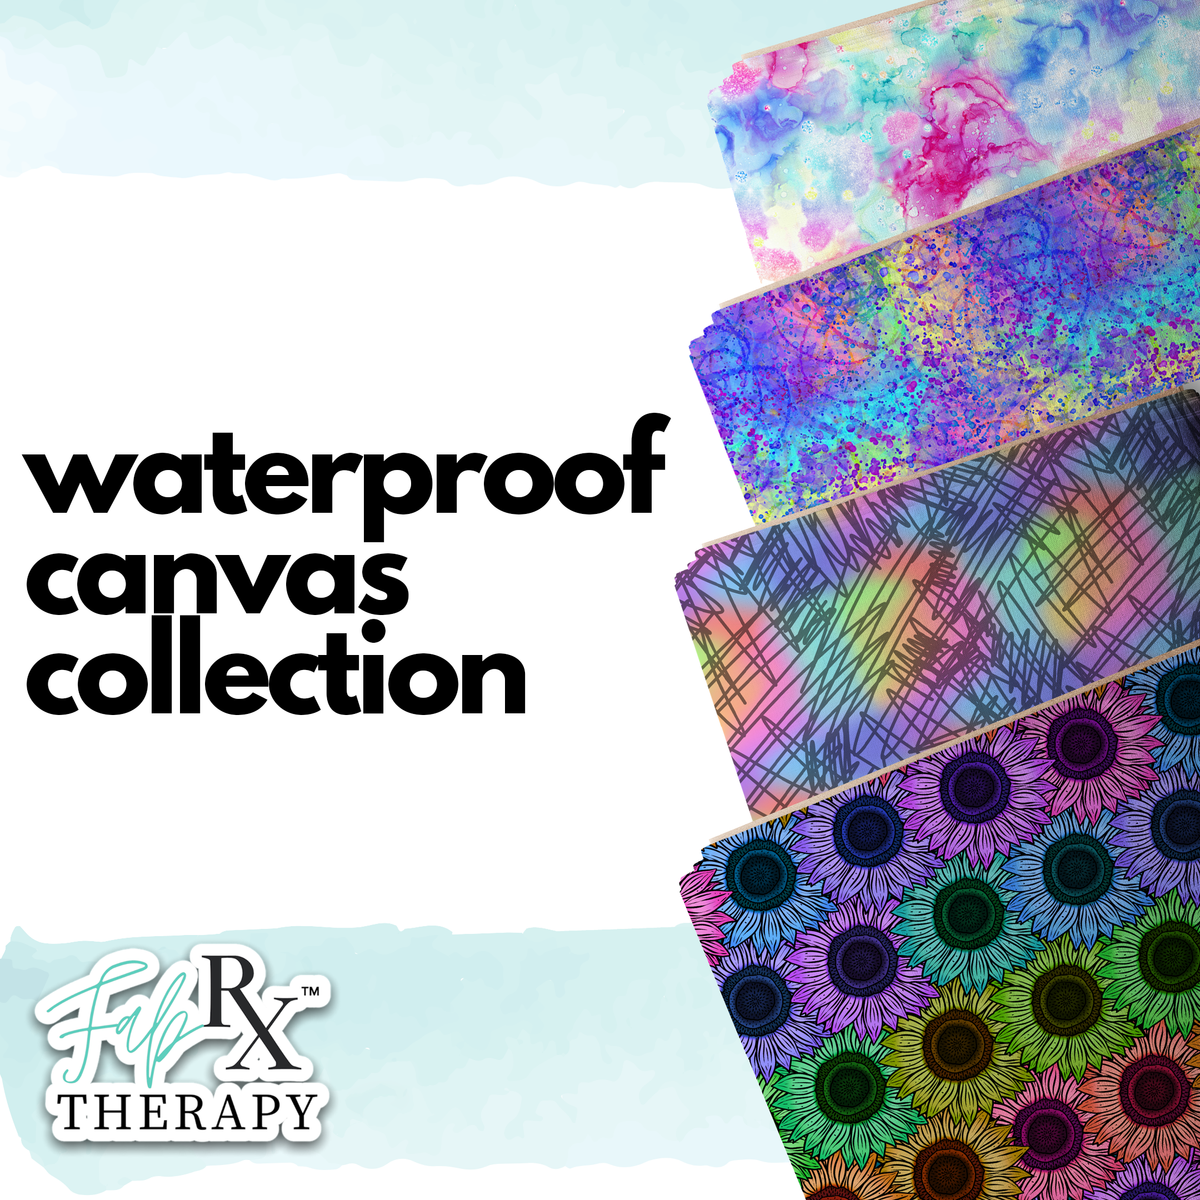 Waterproof Canvas - RETAIL – Fabric Therapy